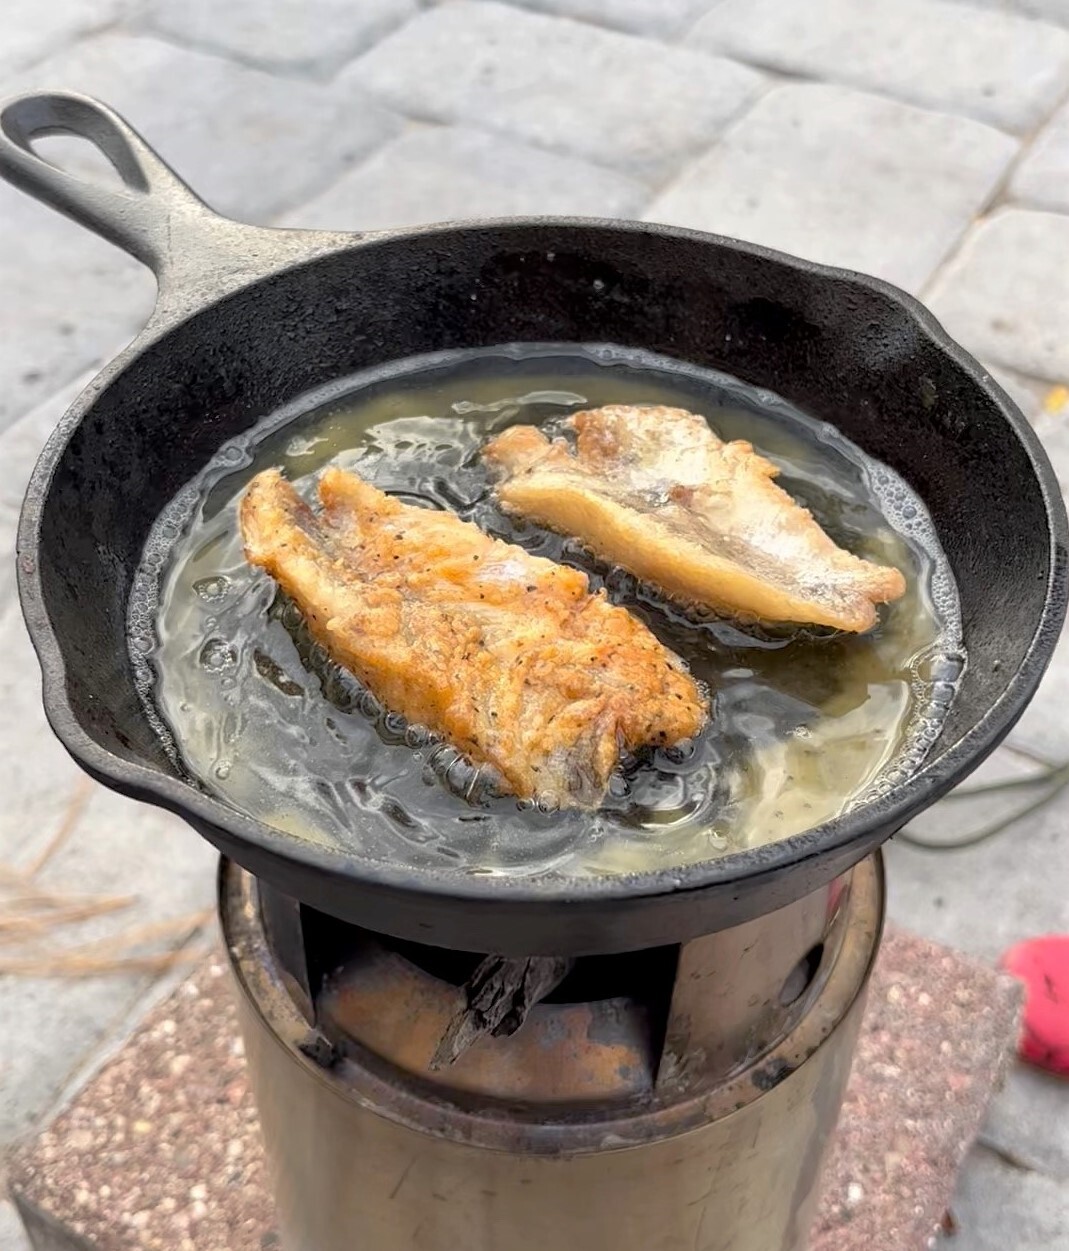 Fish being fried